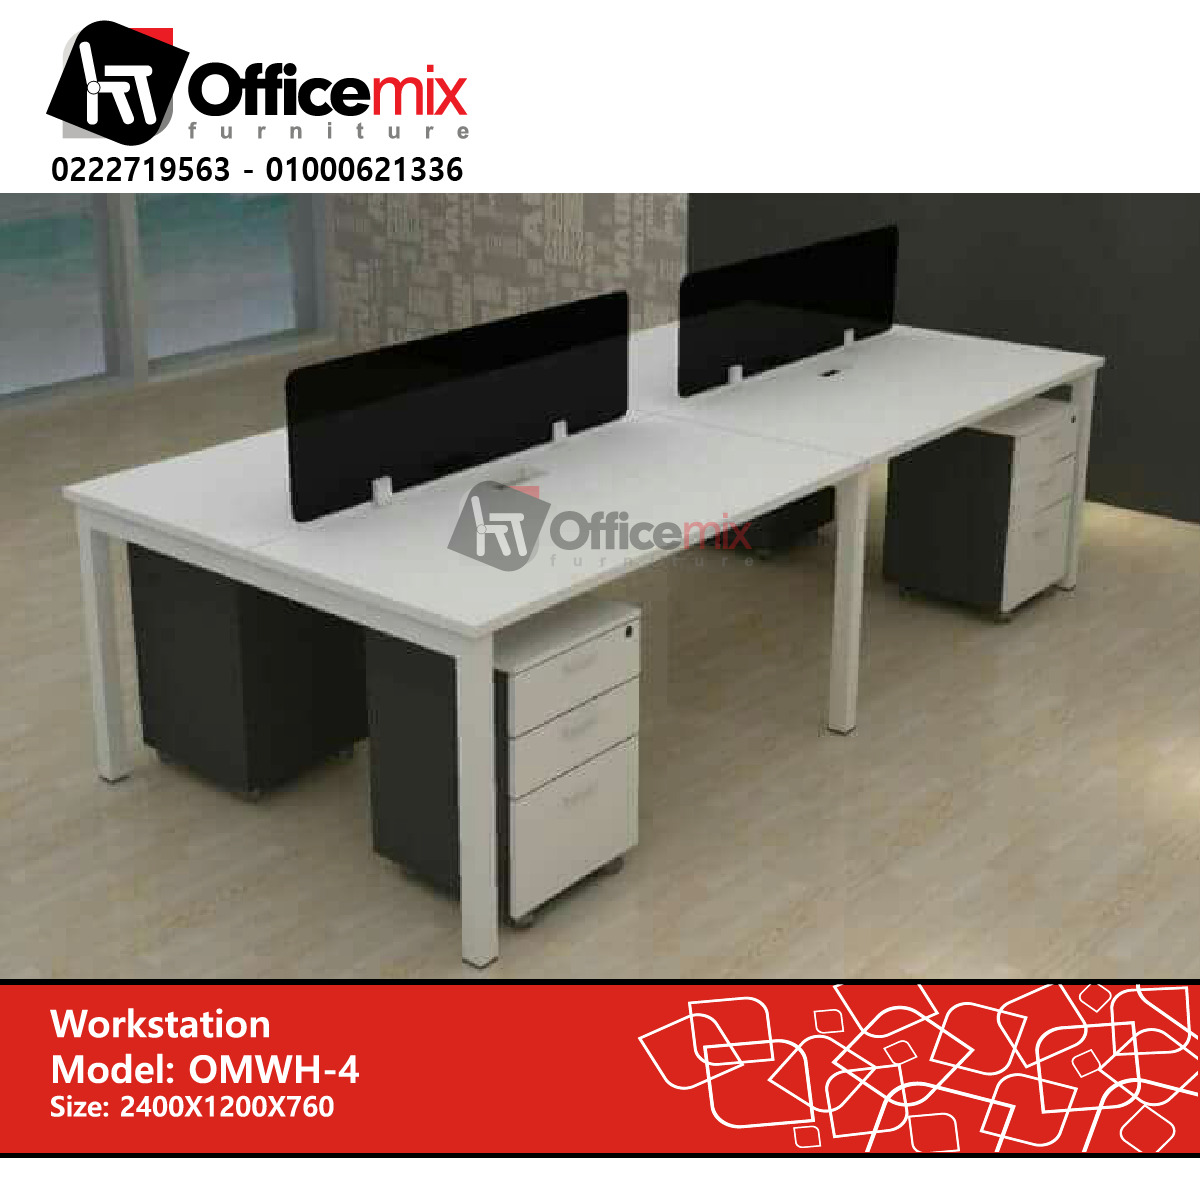 Office mix Workstation OMWH-4